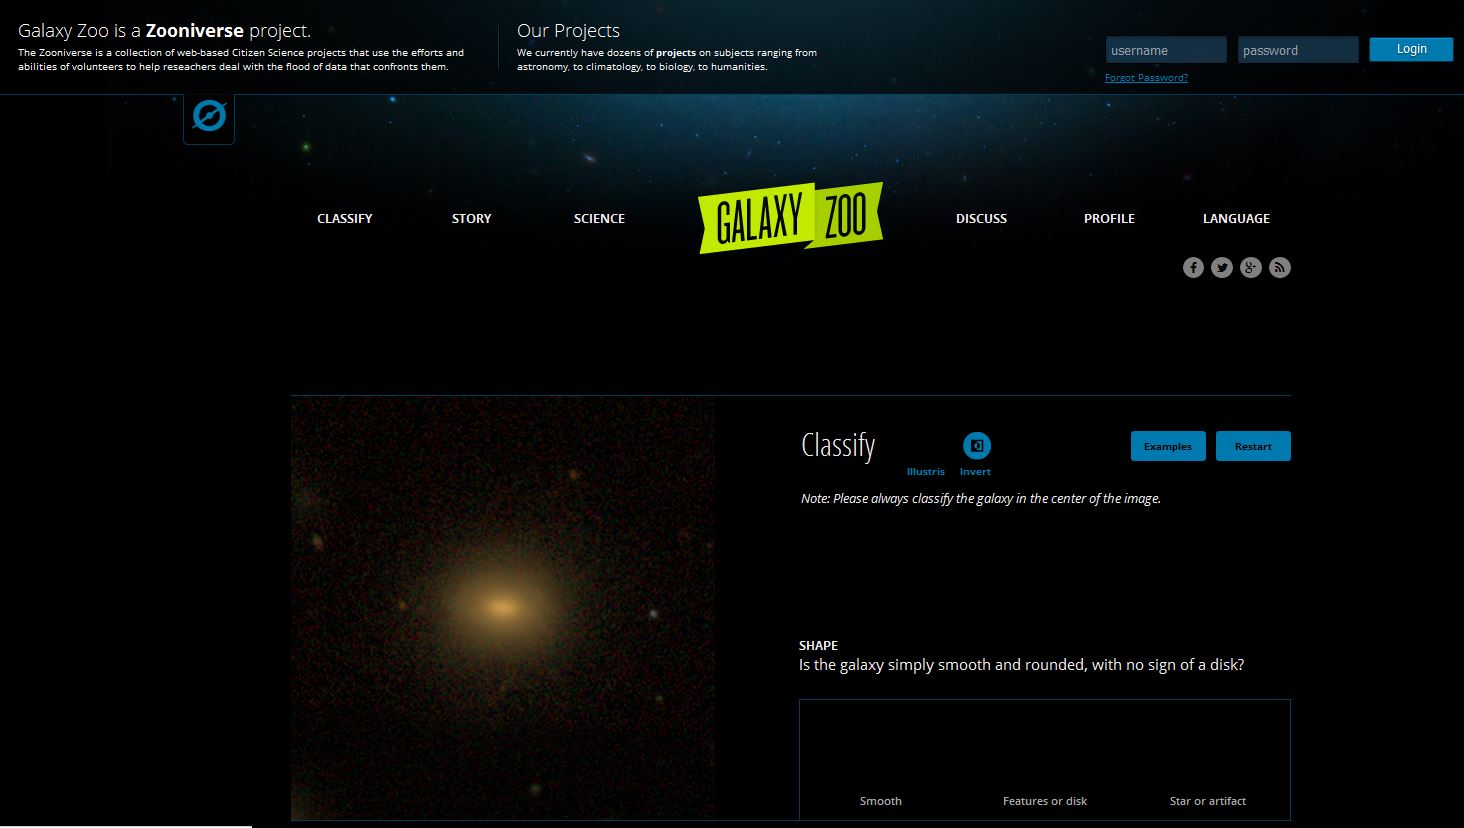 On Galaxy Zoo, users are invited to classify galaxies.